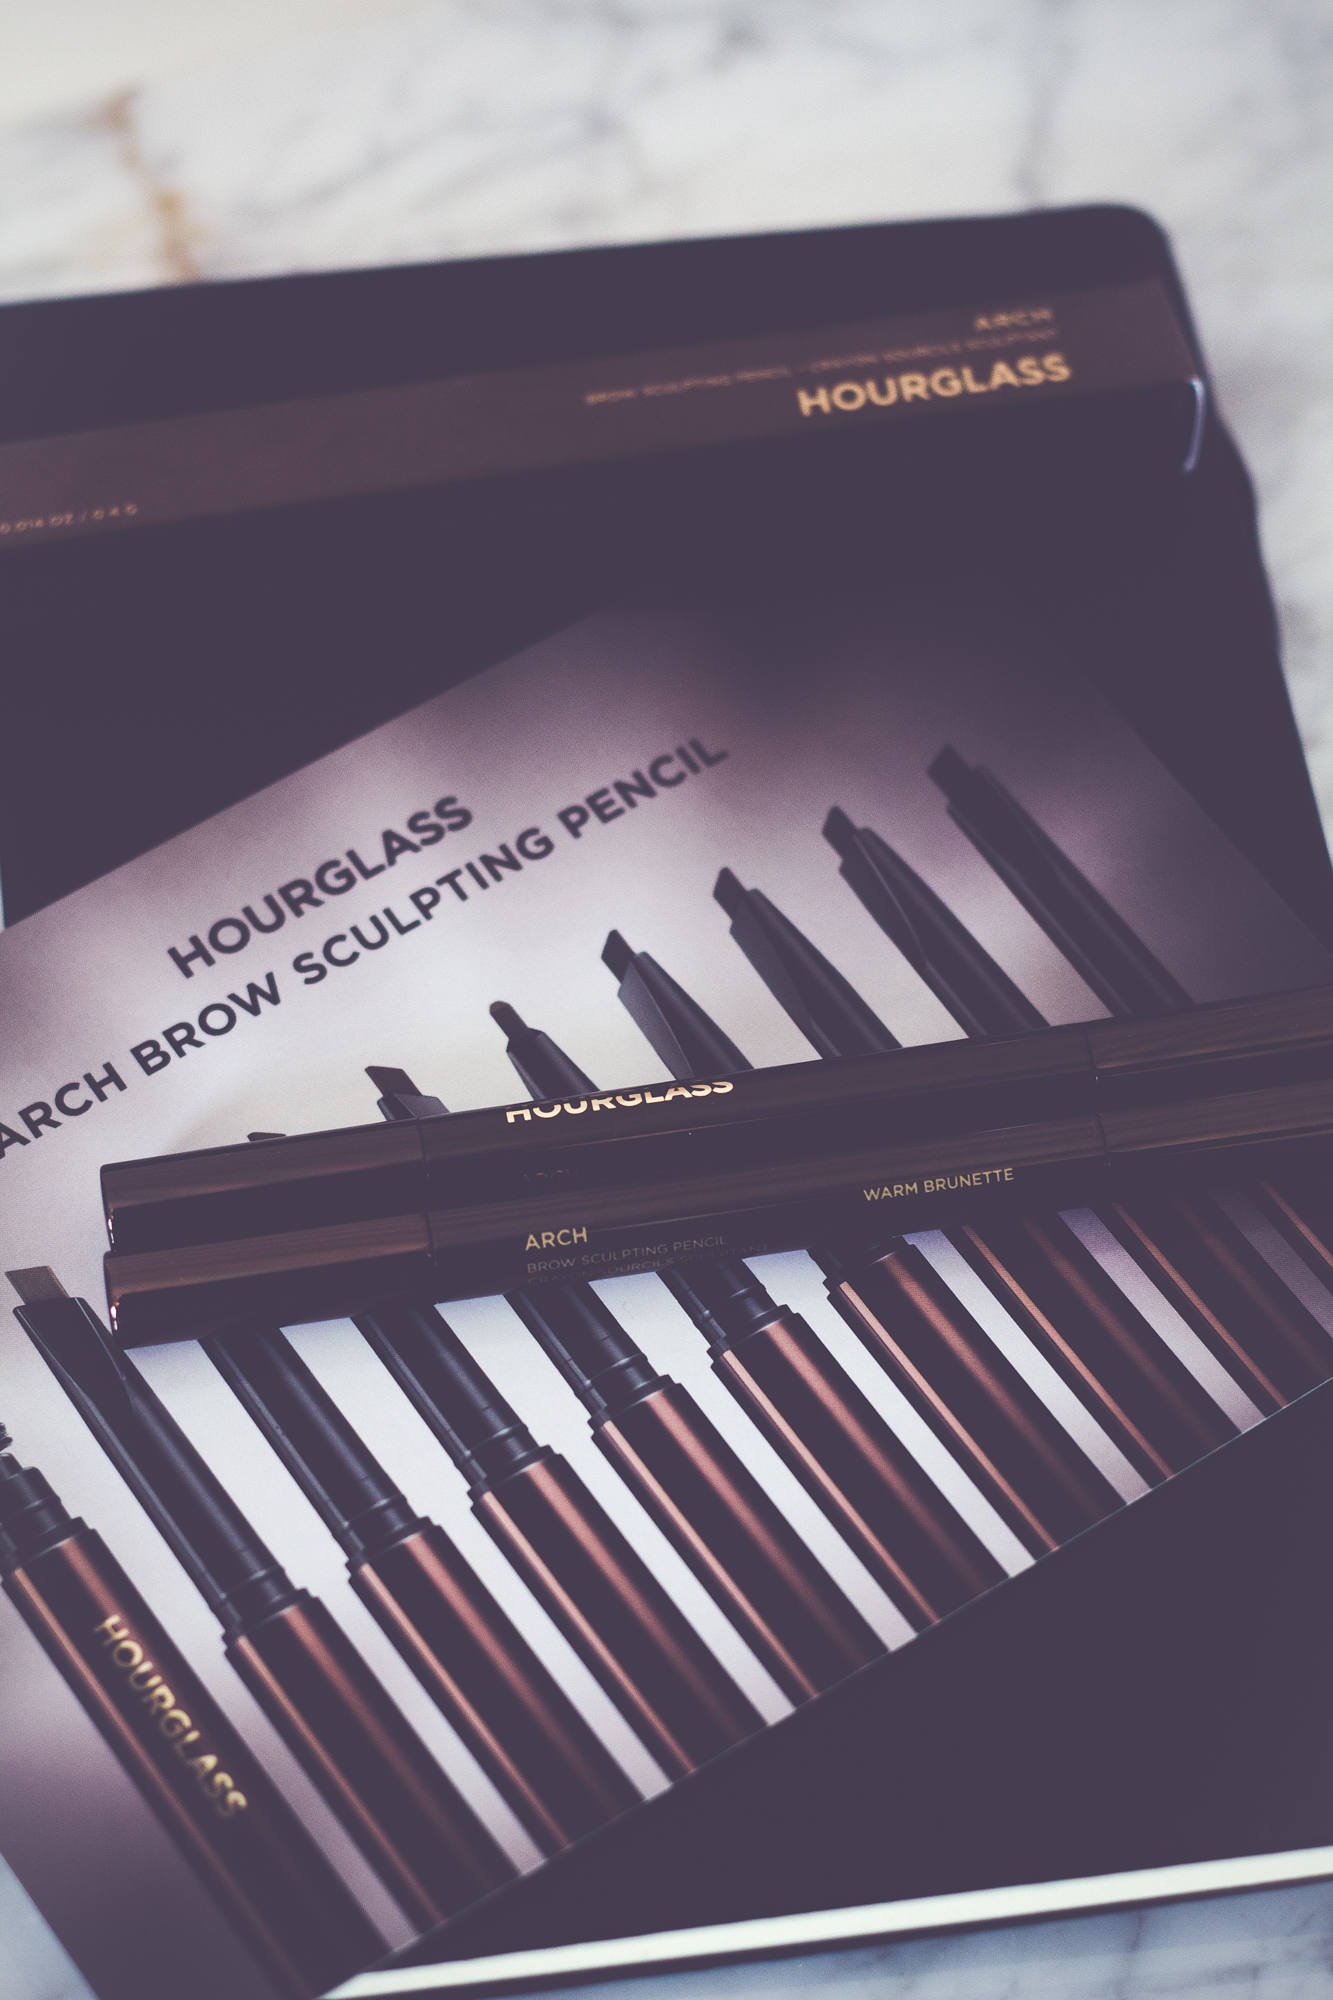 HourGlass Arch Brow Sculpting Pencil |BeingMelody.com| @BeingMelody (6 of 6)